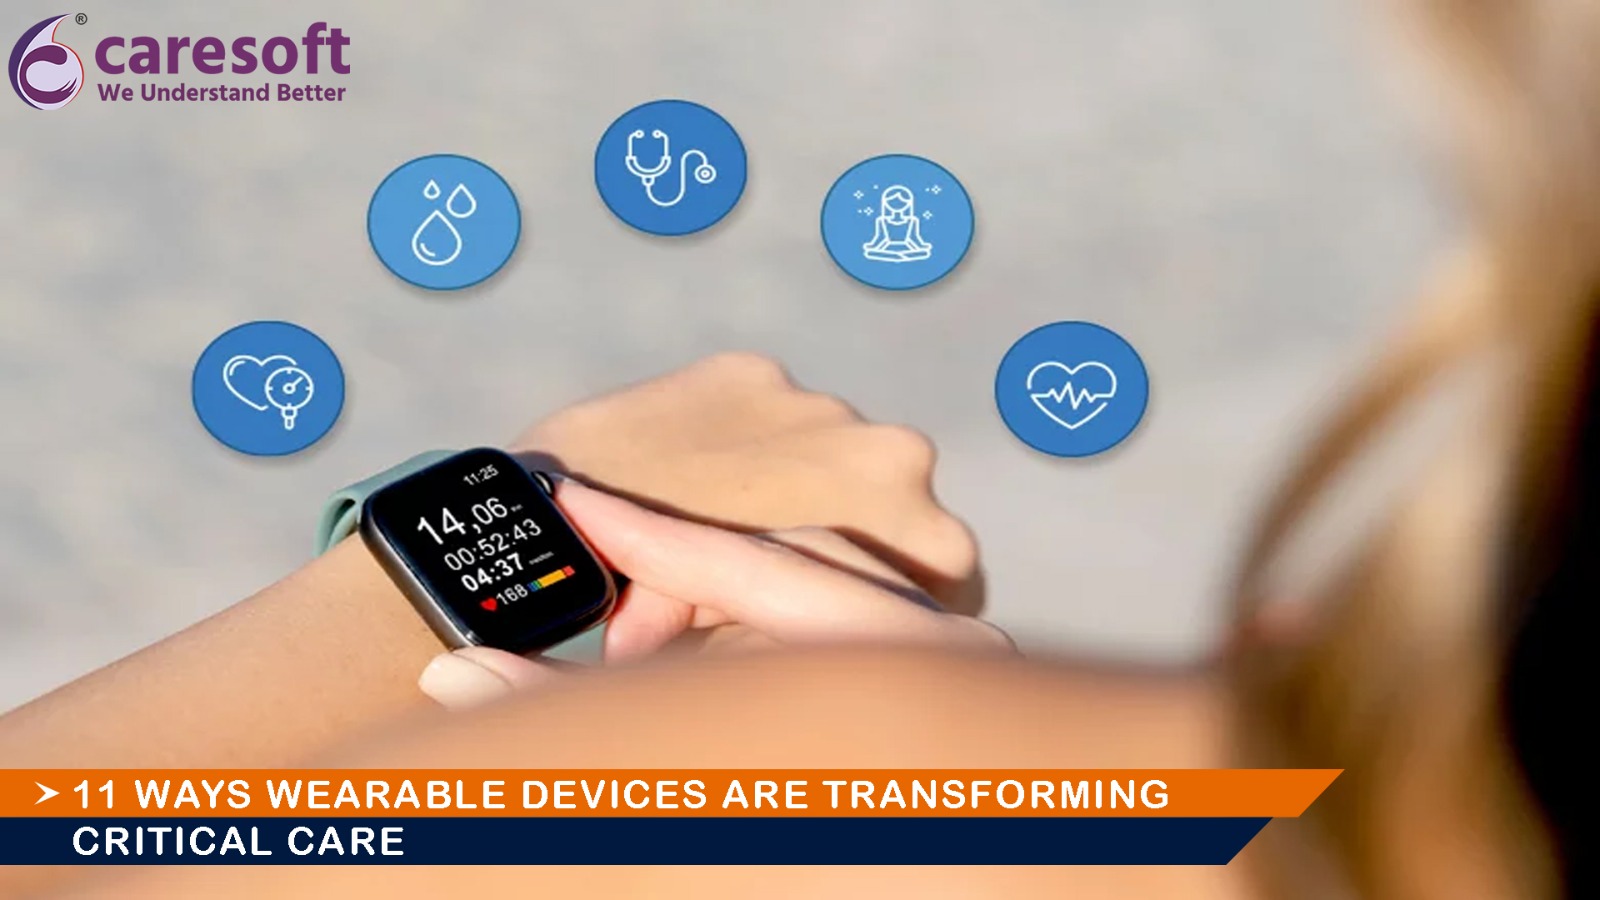 The Role of Wearable Devices in Revolutionizing Healthcare and Empowering Patients